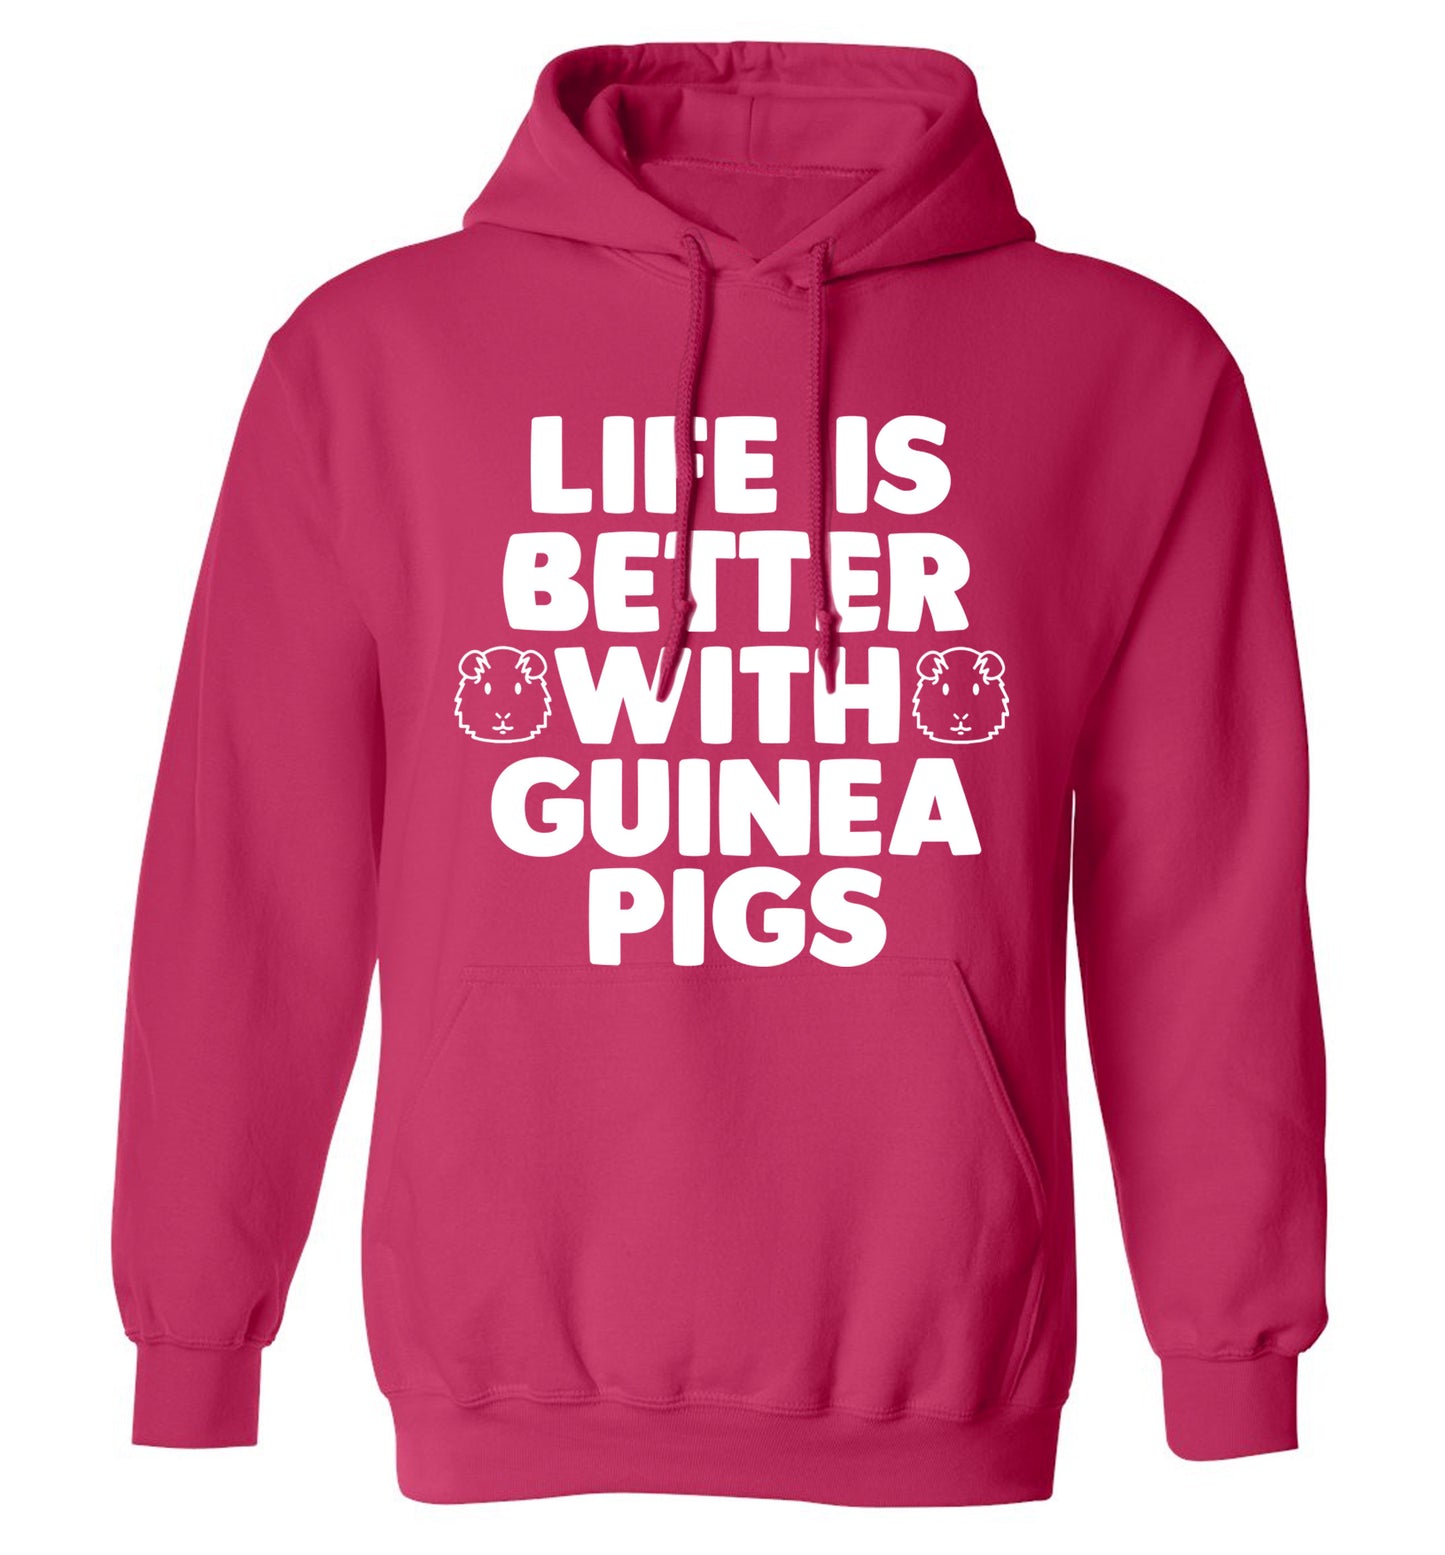 Life is better with guinea pigs adults unisex pink hoodie 2XL